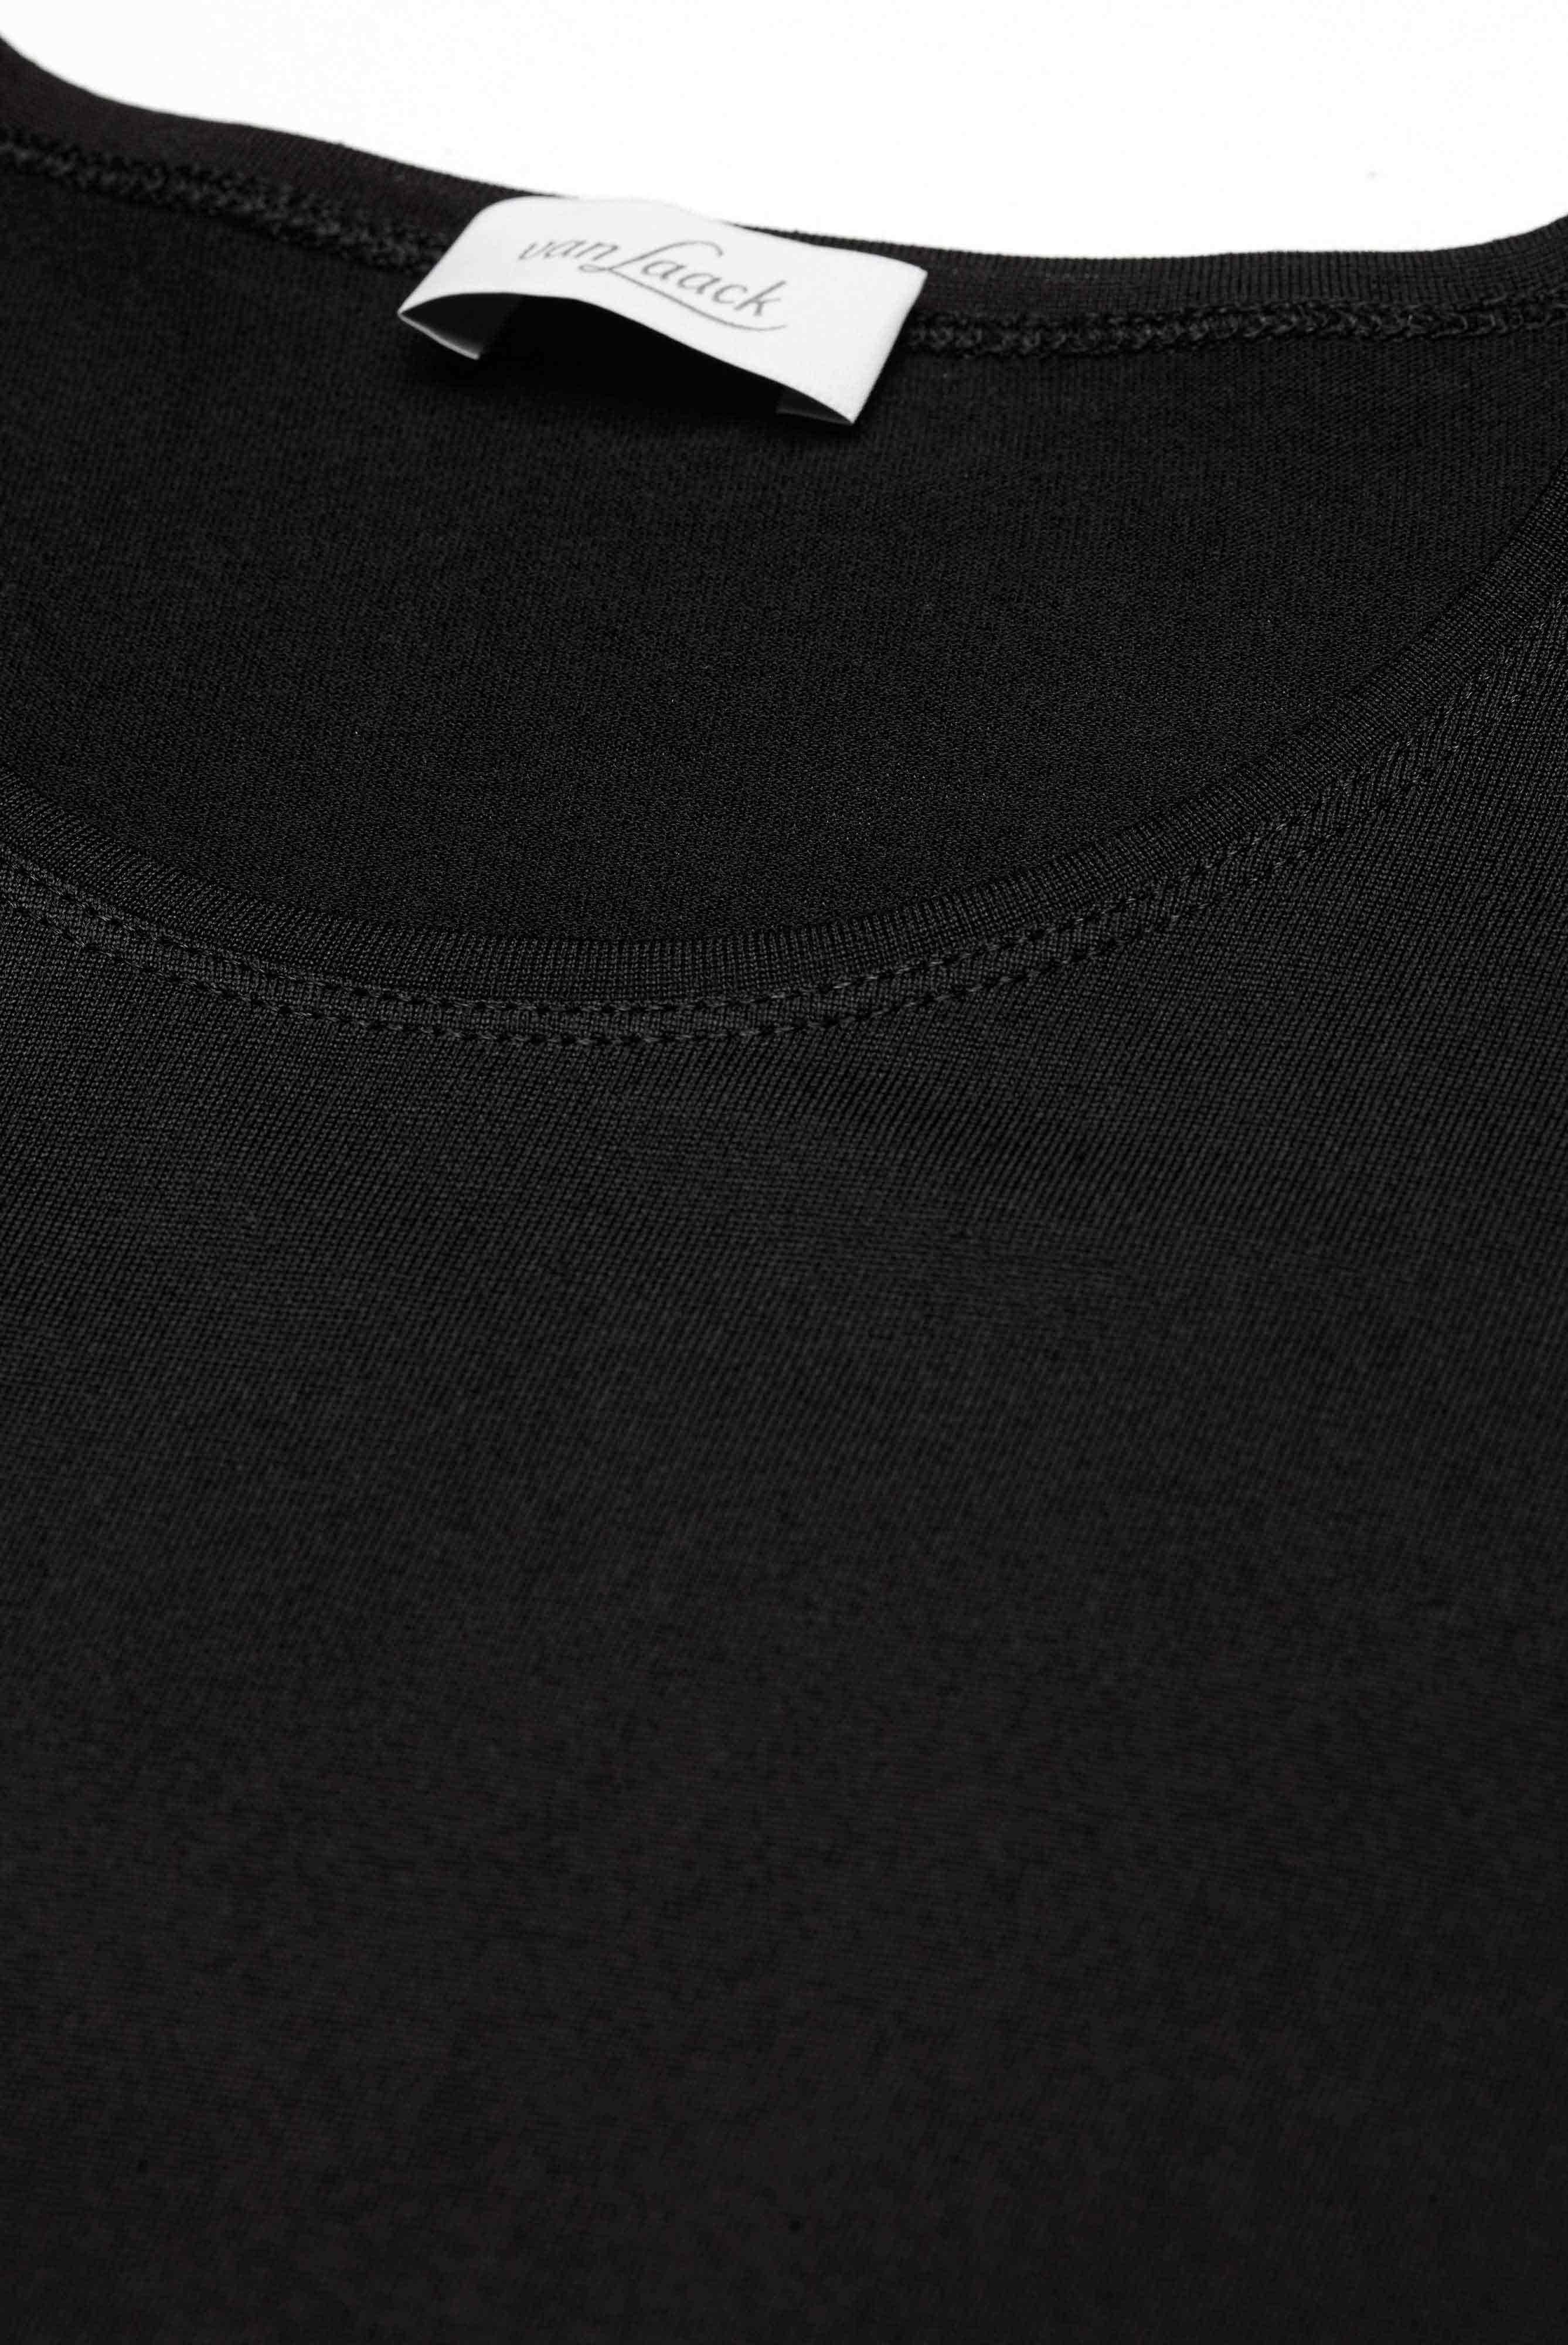 Tops & T-Shirts+Roundneck T-shirt with Silk+07.2122..Z20090.099.34